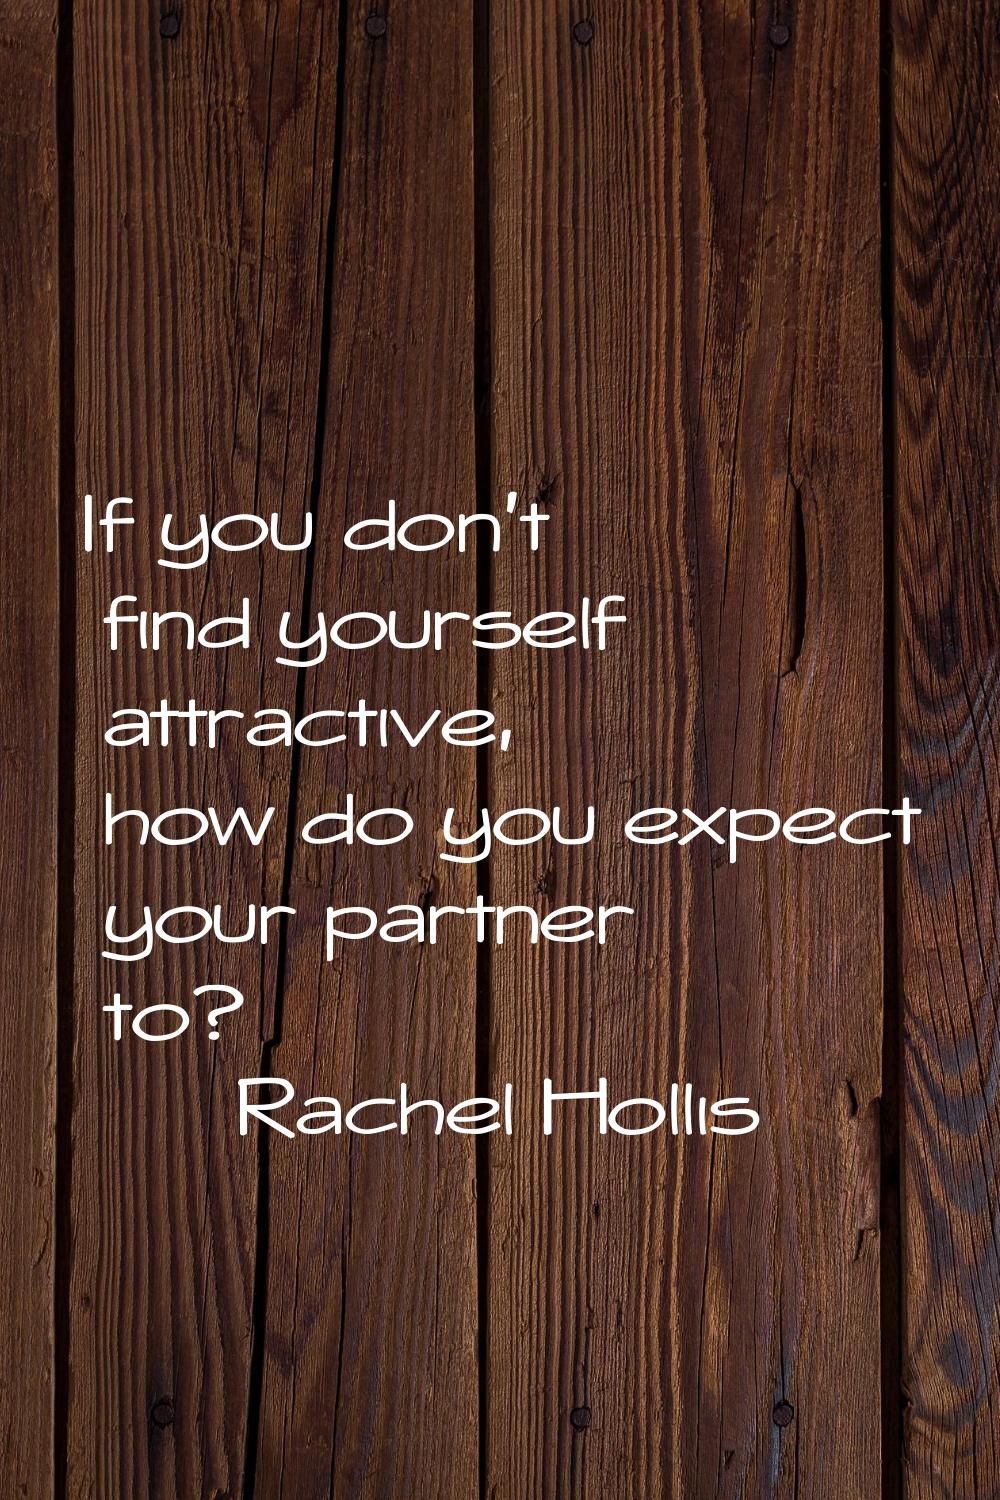 If you don't find yourself attractive, how do you expect your partner to?